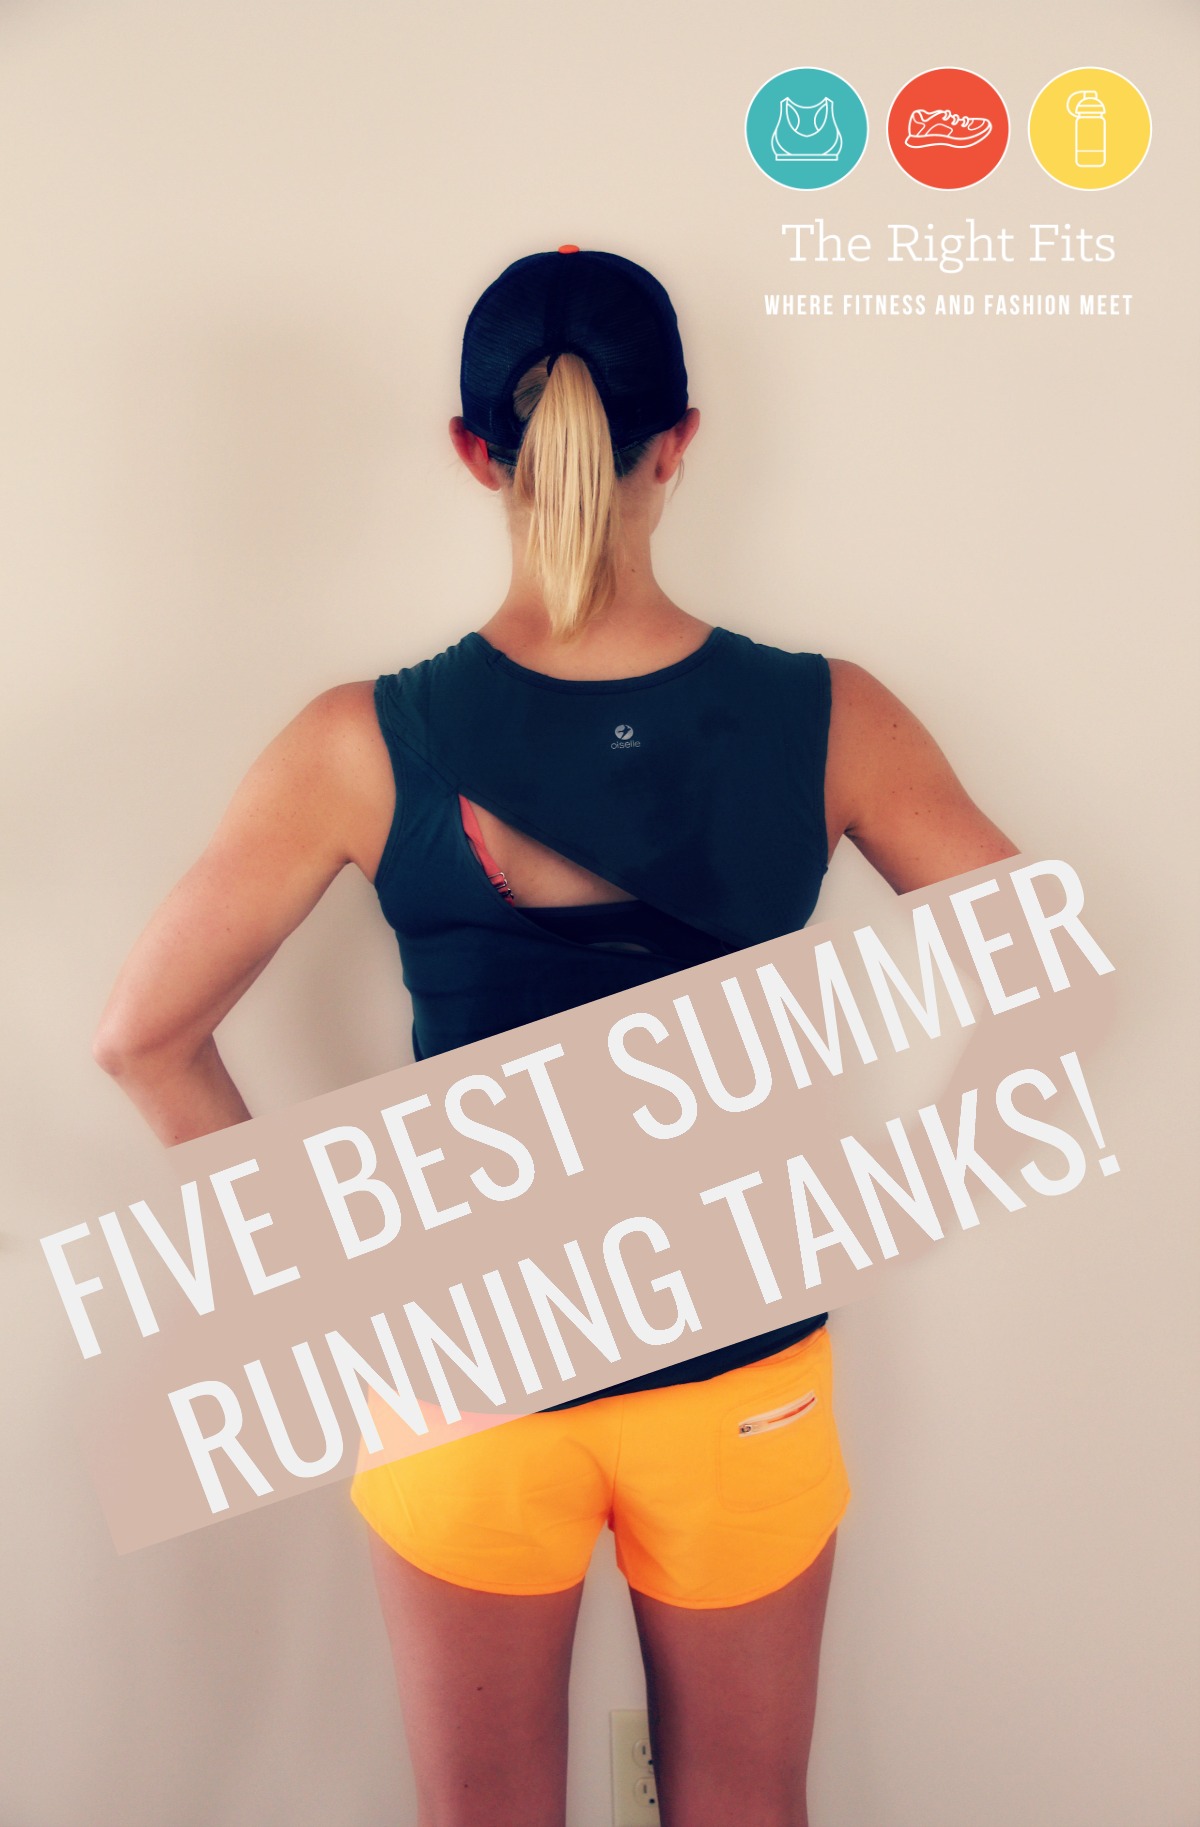 Fitness Fashion: The Five Best Summer Running Tanks - The Right Fits